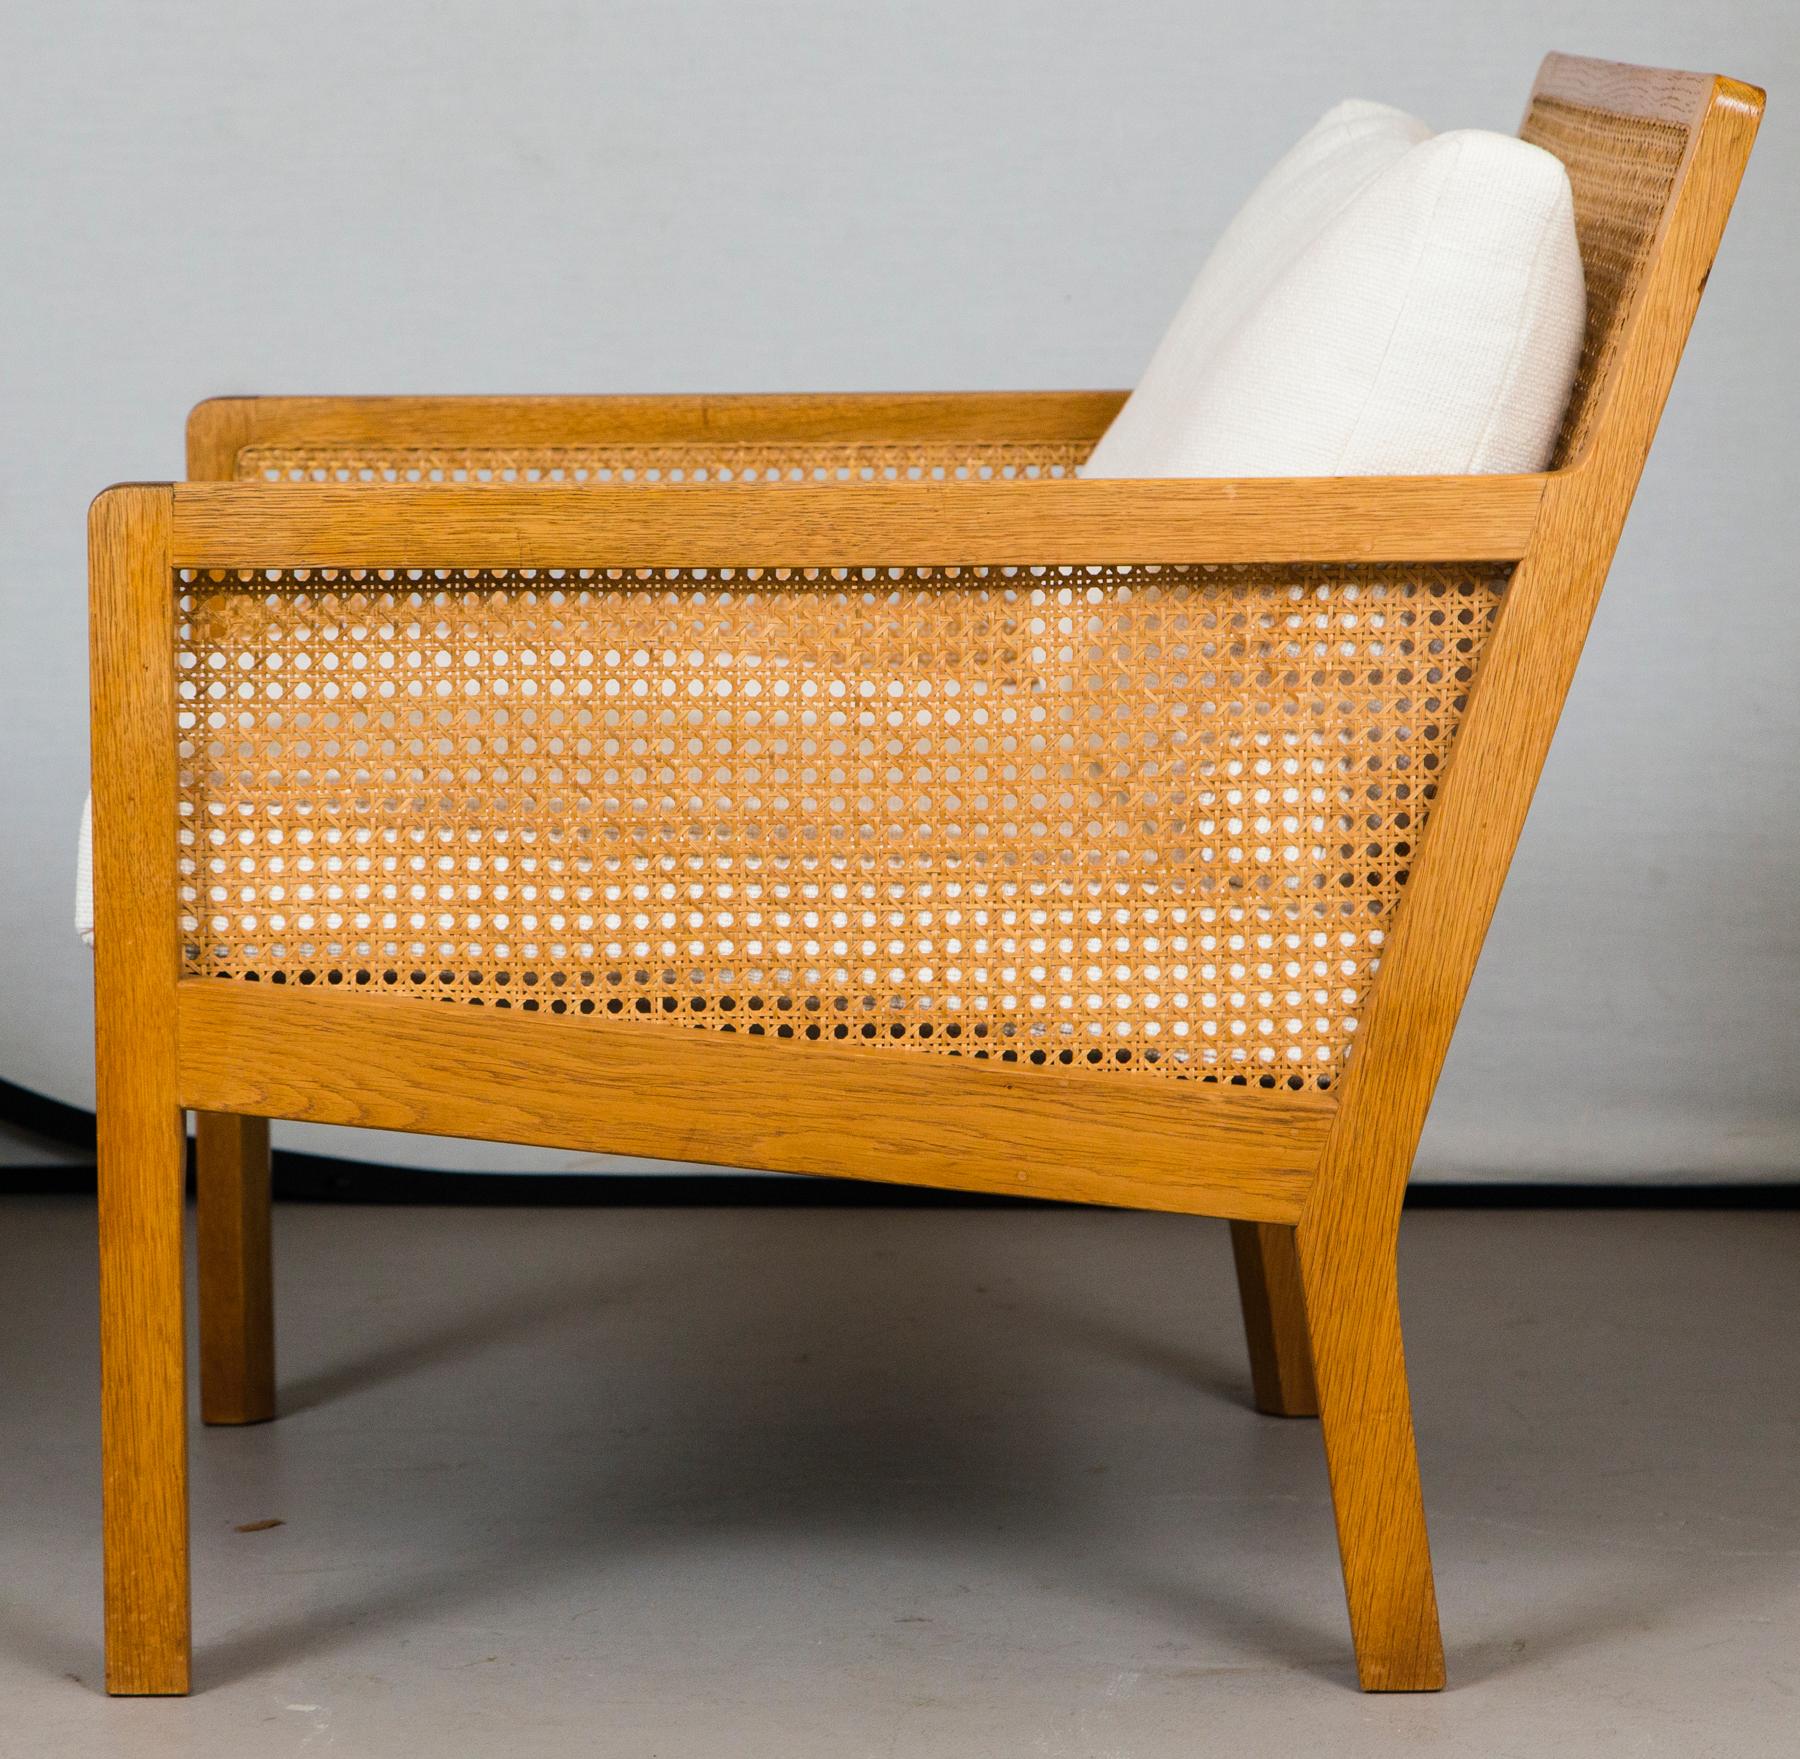 Mid-20th Century Pair of Bernt Petersen Caned Lounge Chairs Reupholstered in White Maharam Linen